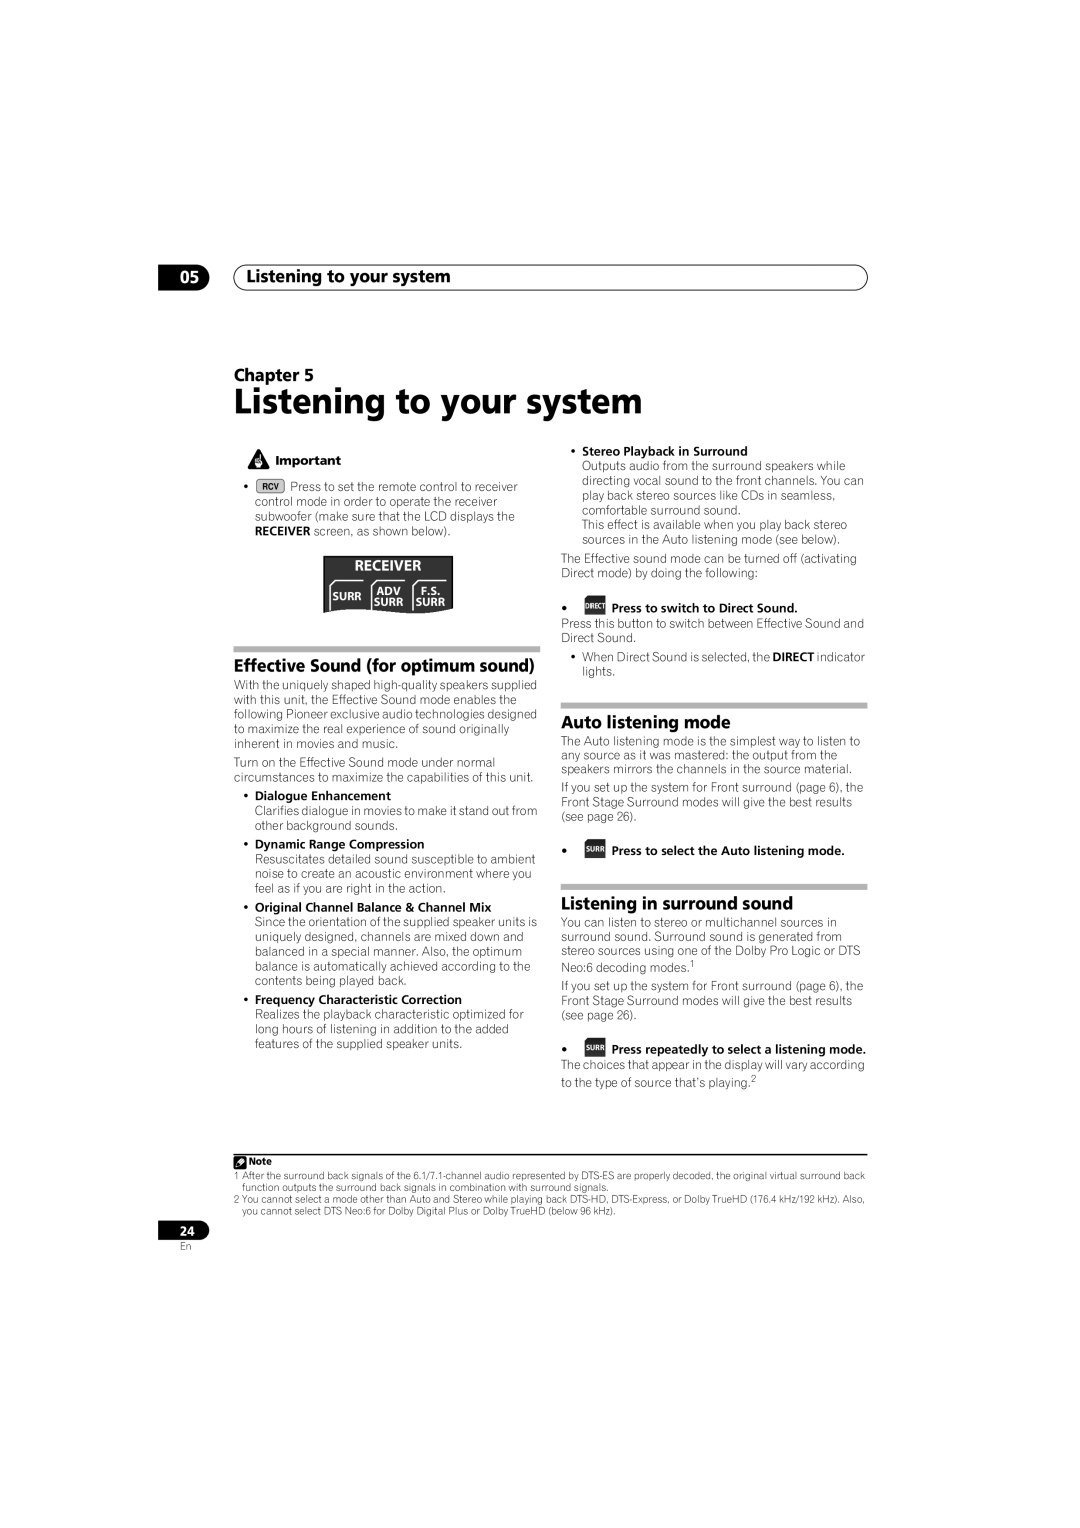 Pioneer SSP-LX70ST 05Listening to your system Chapter, Effective Sound for optimum sound, Auto listening mode, Surr 